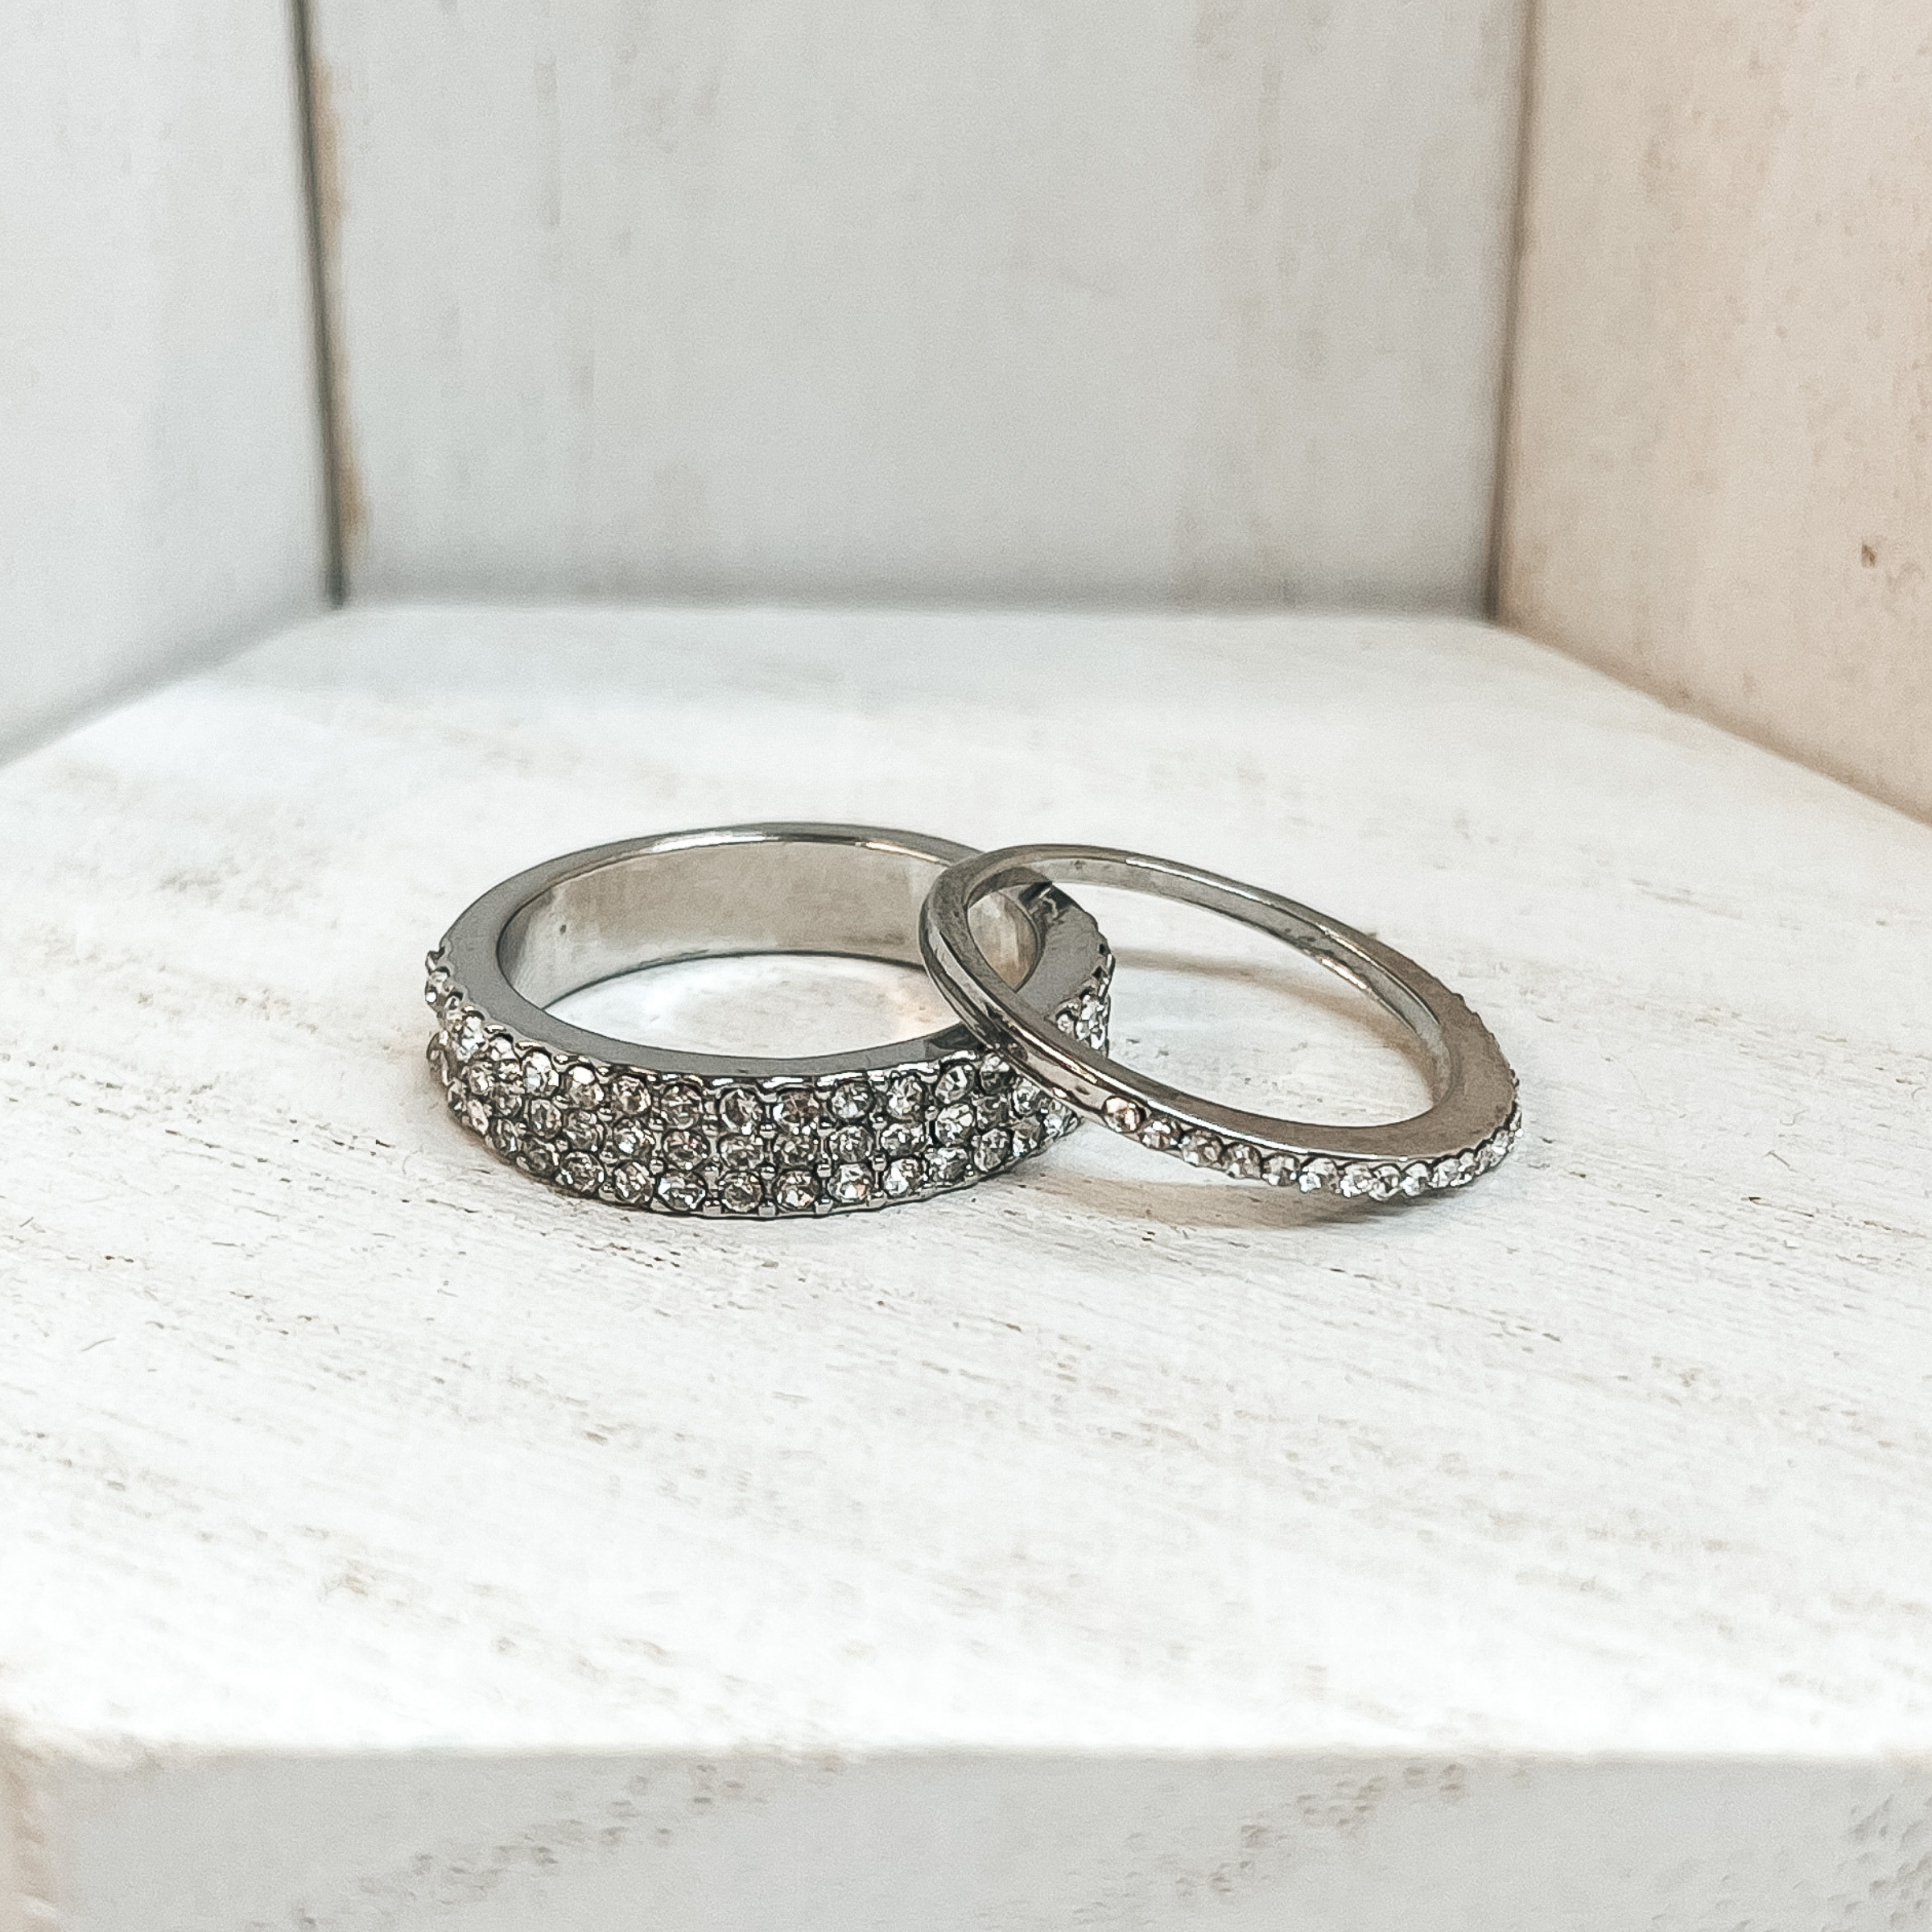 Set of 5 | Multi Textured Ring Set in Silver Tone with Clear CZ Crystals - Giddy Up Glamour Boutique